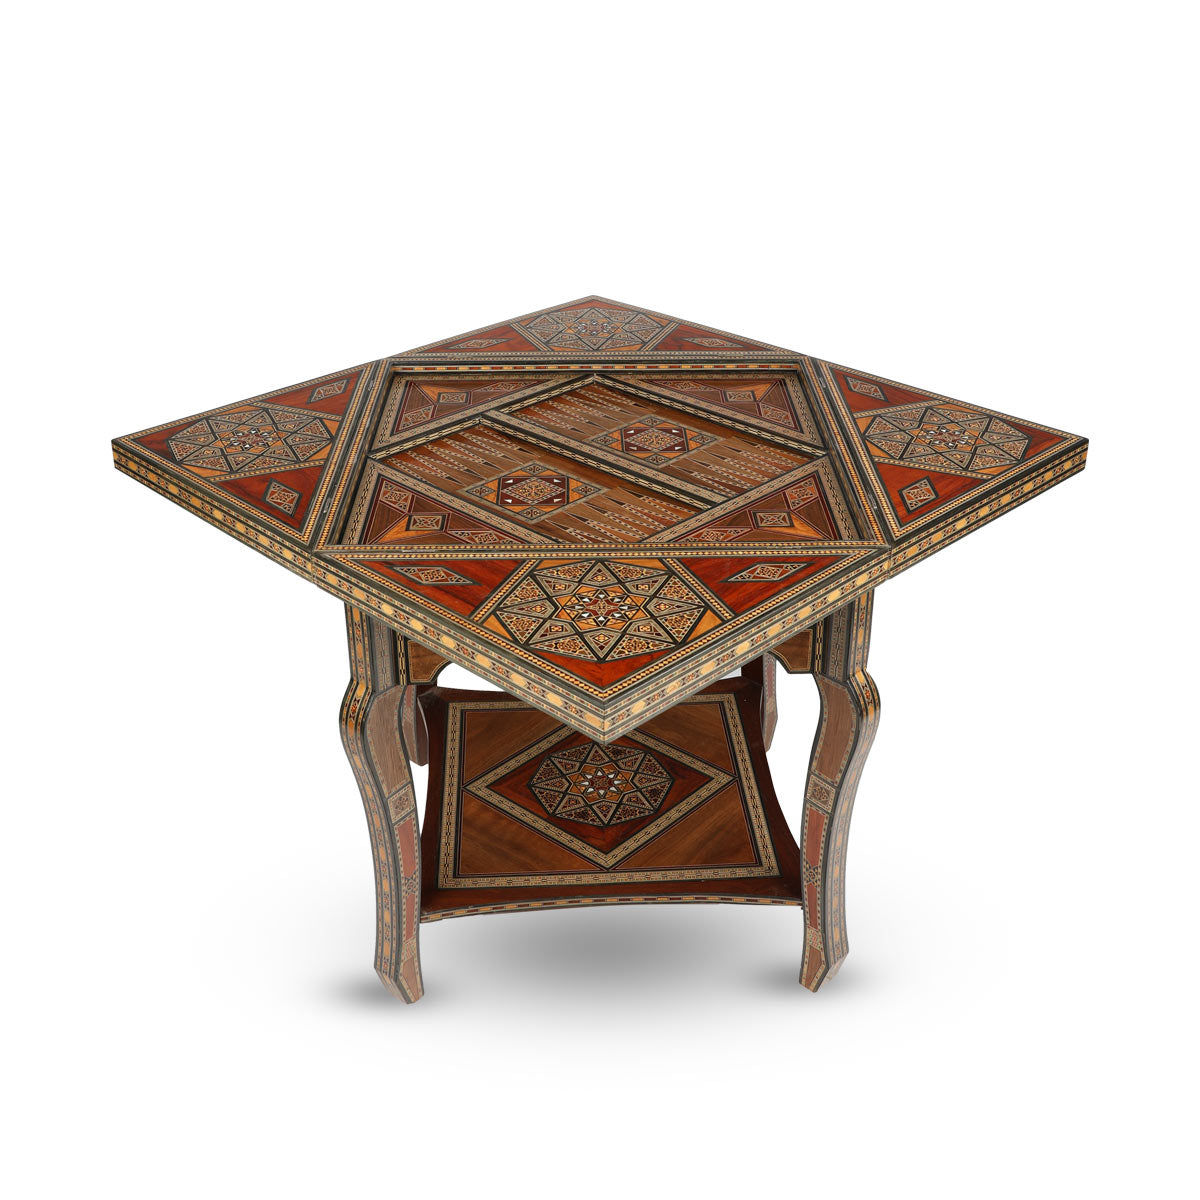 Angled Corner View of Syrian Mosaic Patterned Marquetry Inlaid  Wooden Playing Table